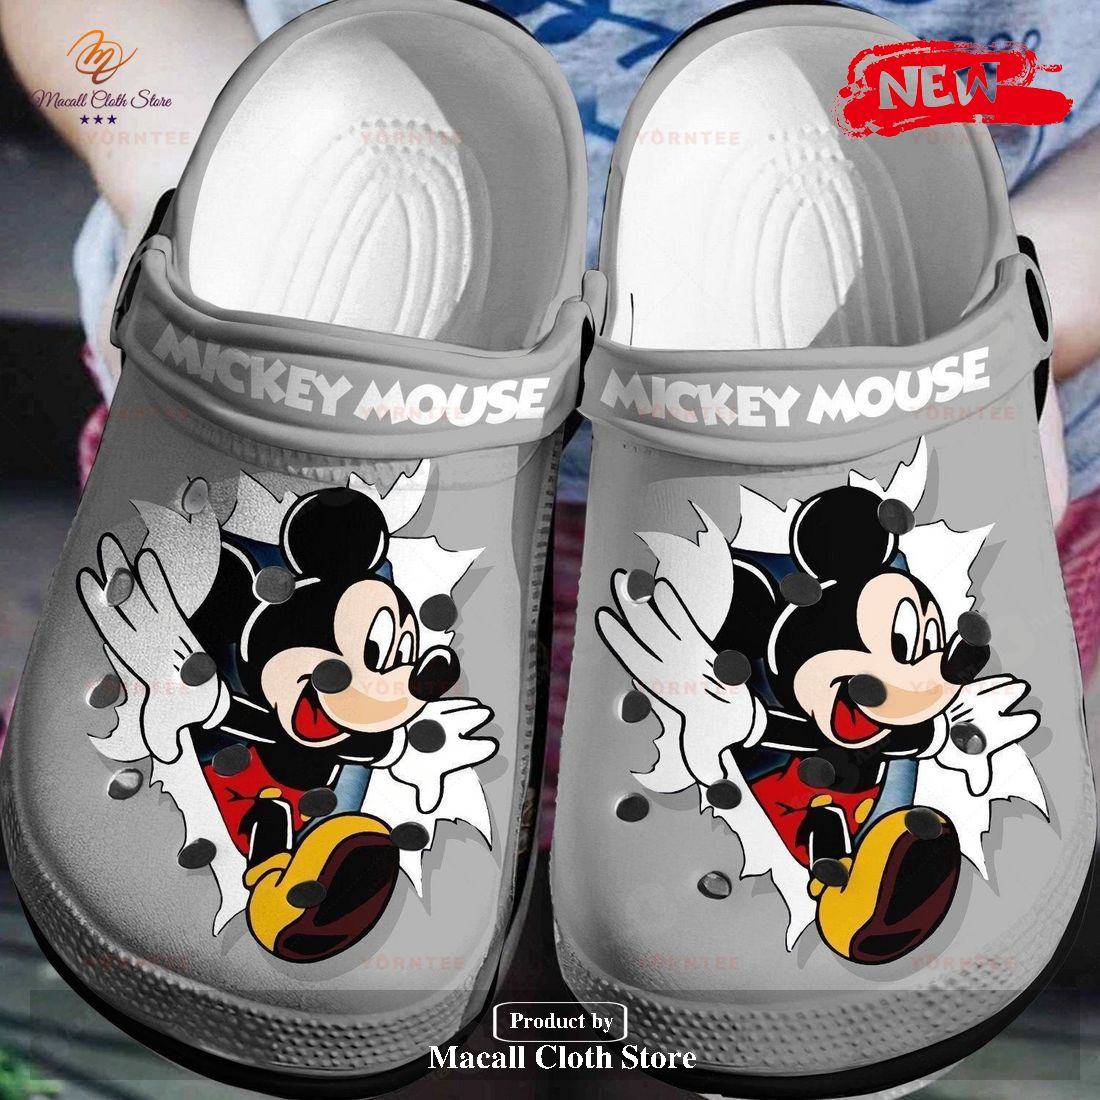 NEW] Mickey Mouse Crocs Clog Shoes Crocs For Mens And Womens - Macall Cloth  Store - Destination for fashionistas